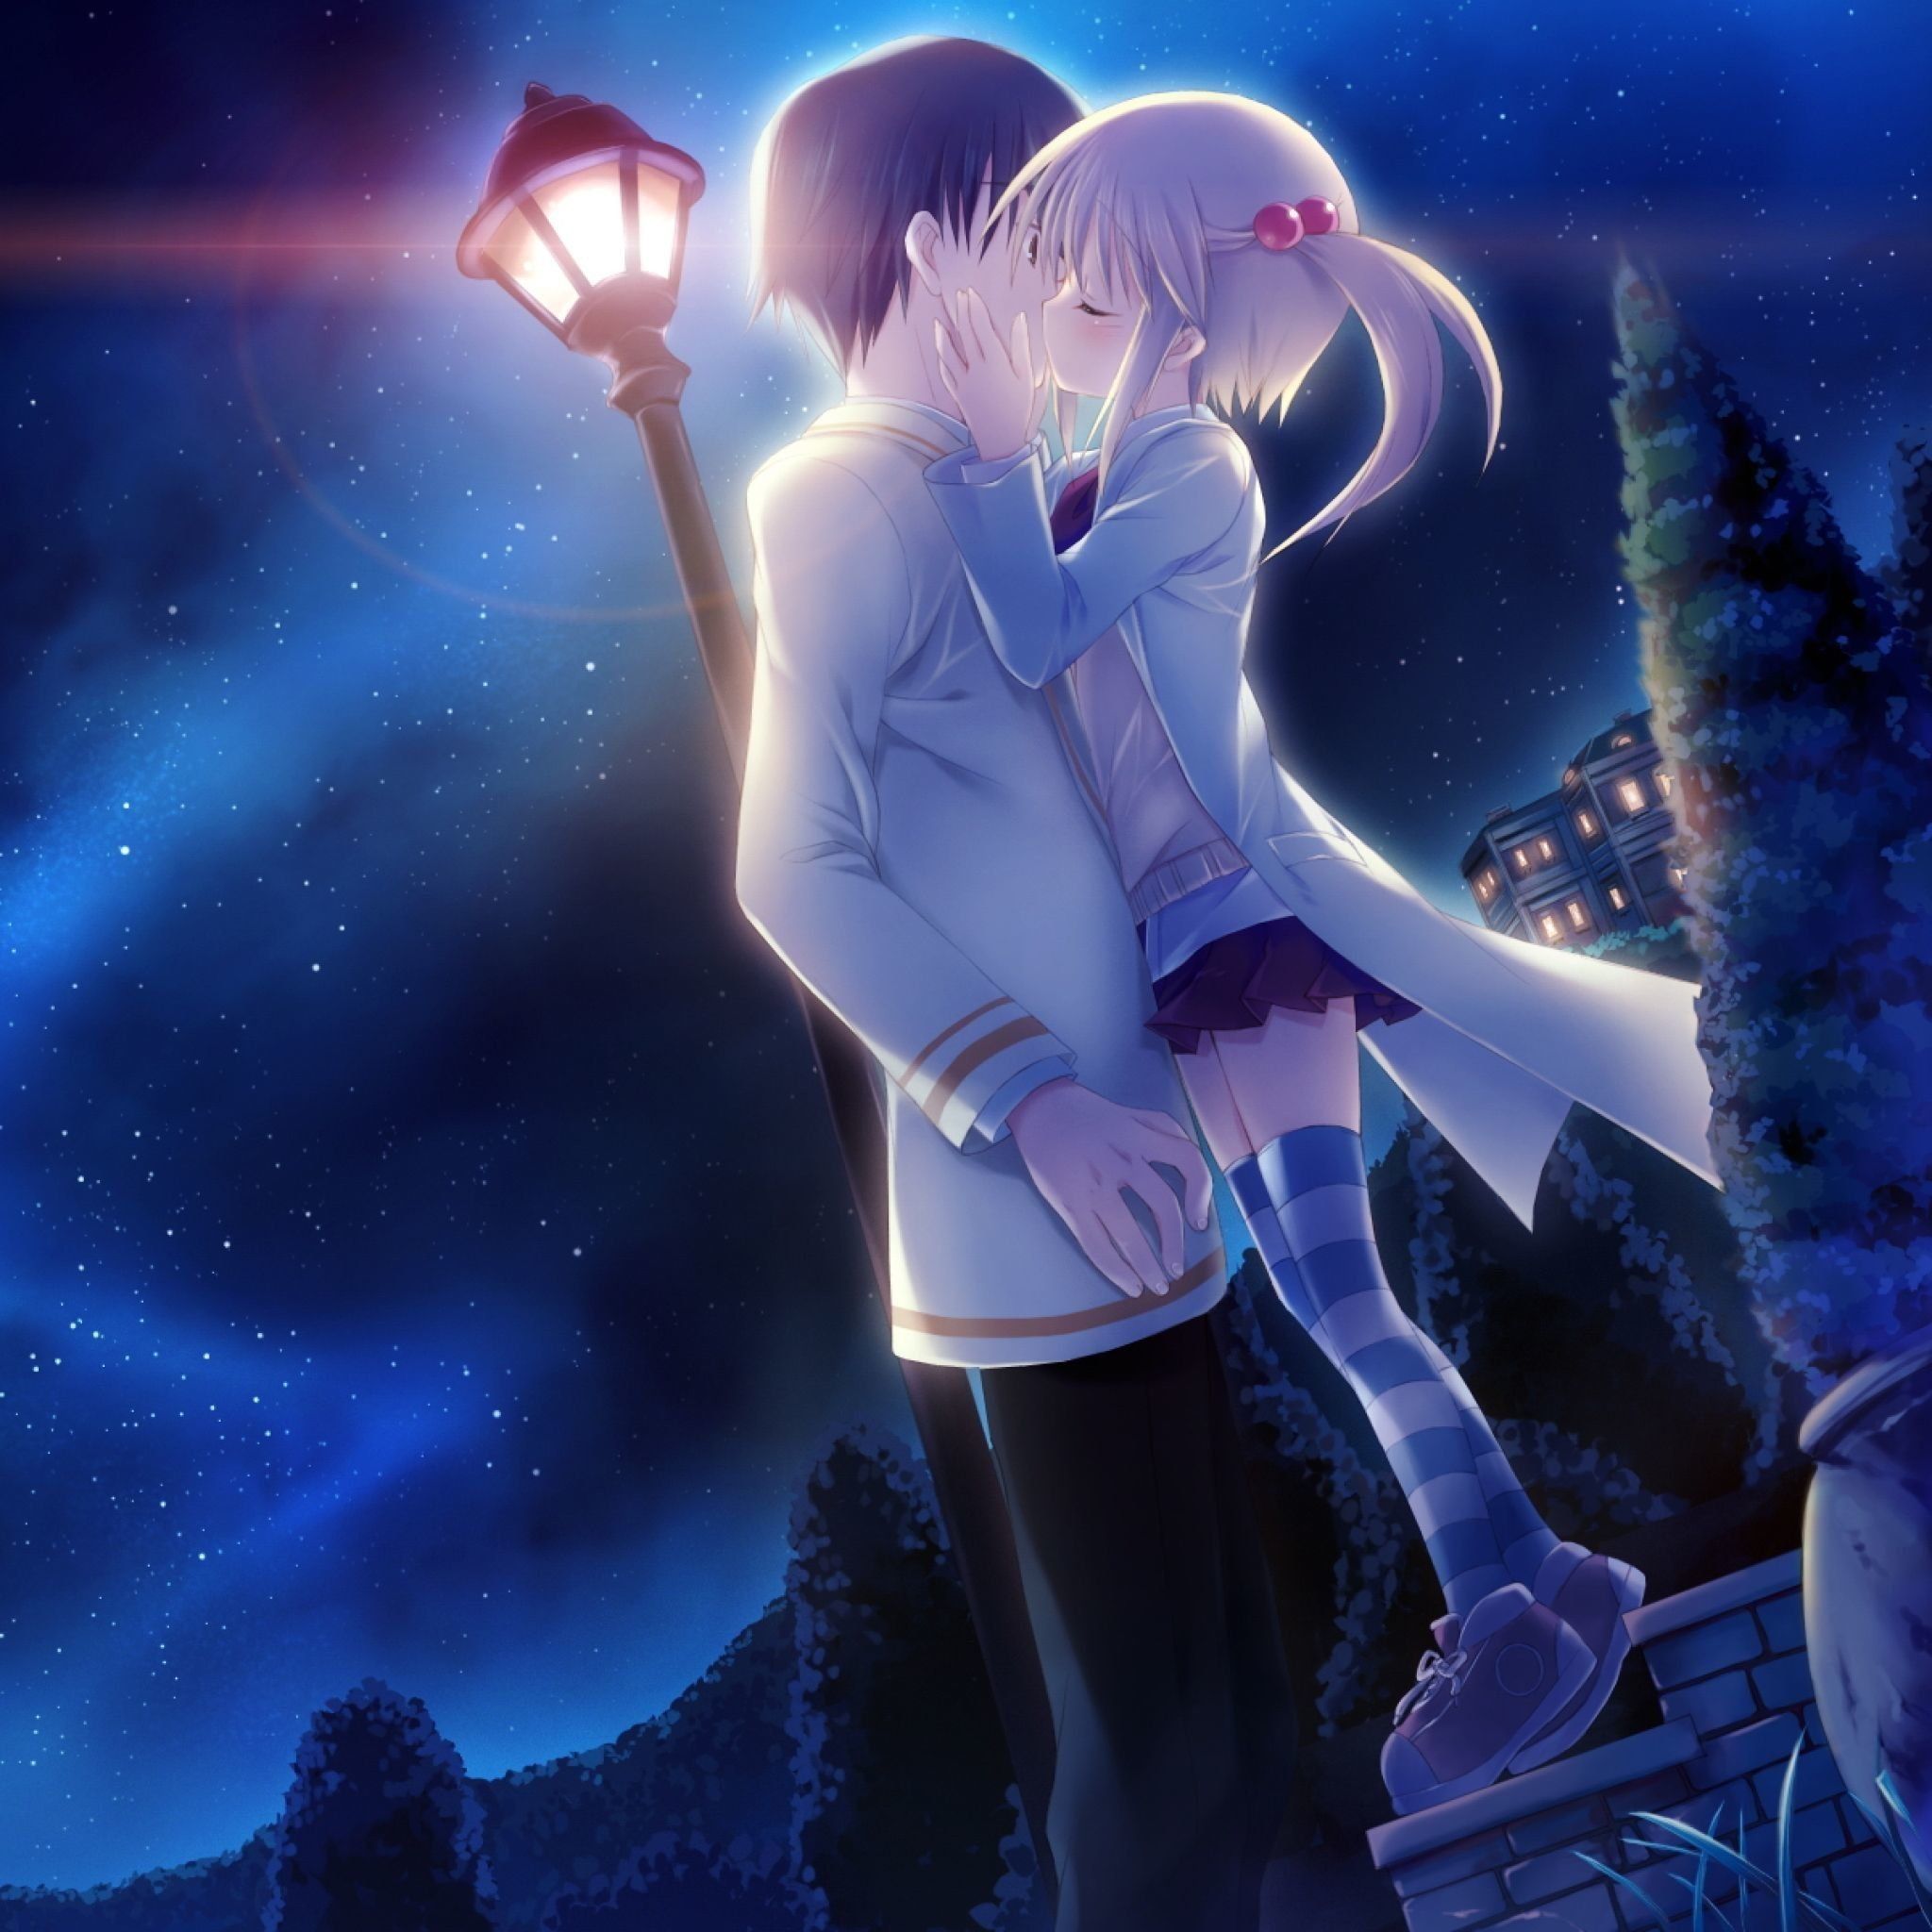 10 Best Romance Anime to Watch With Your Significant Other - TechNadu